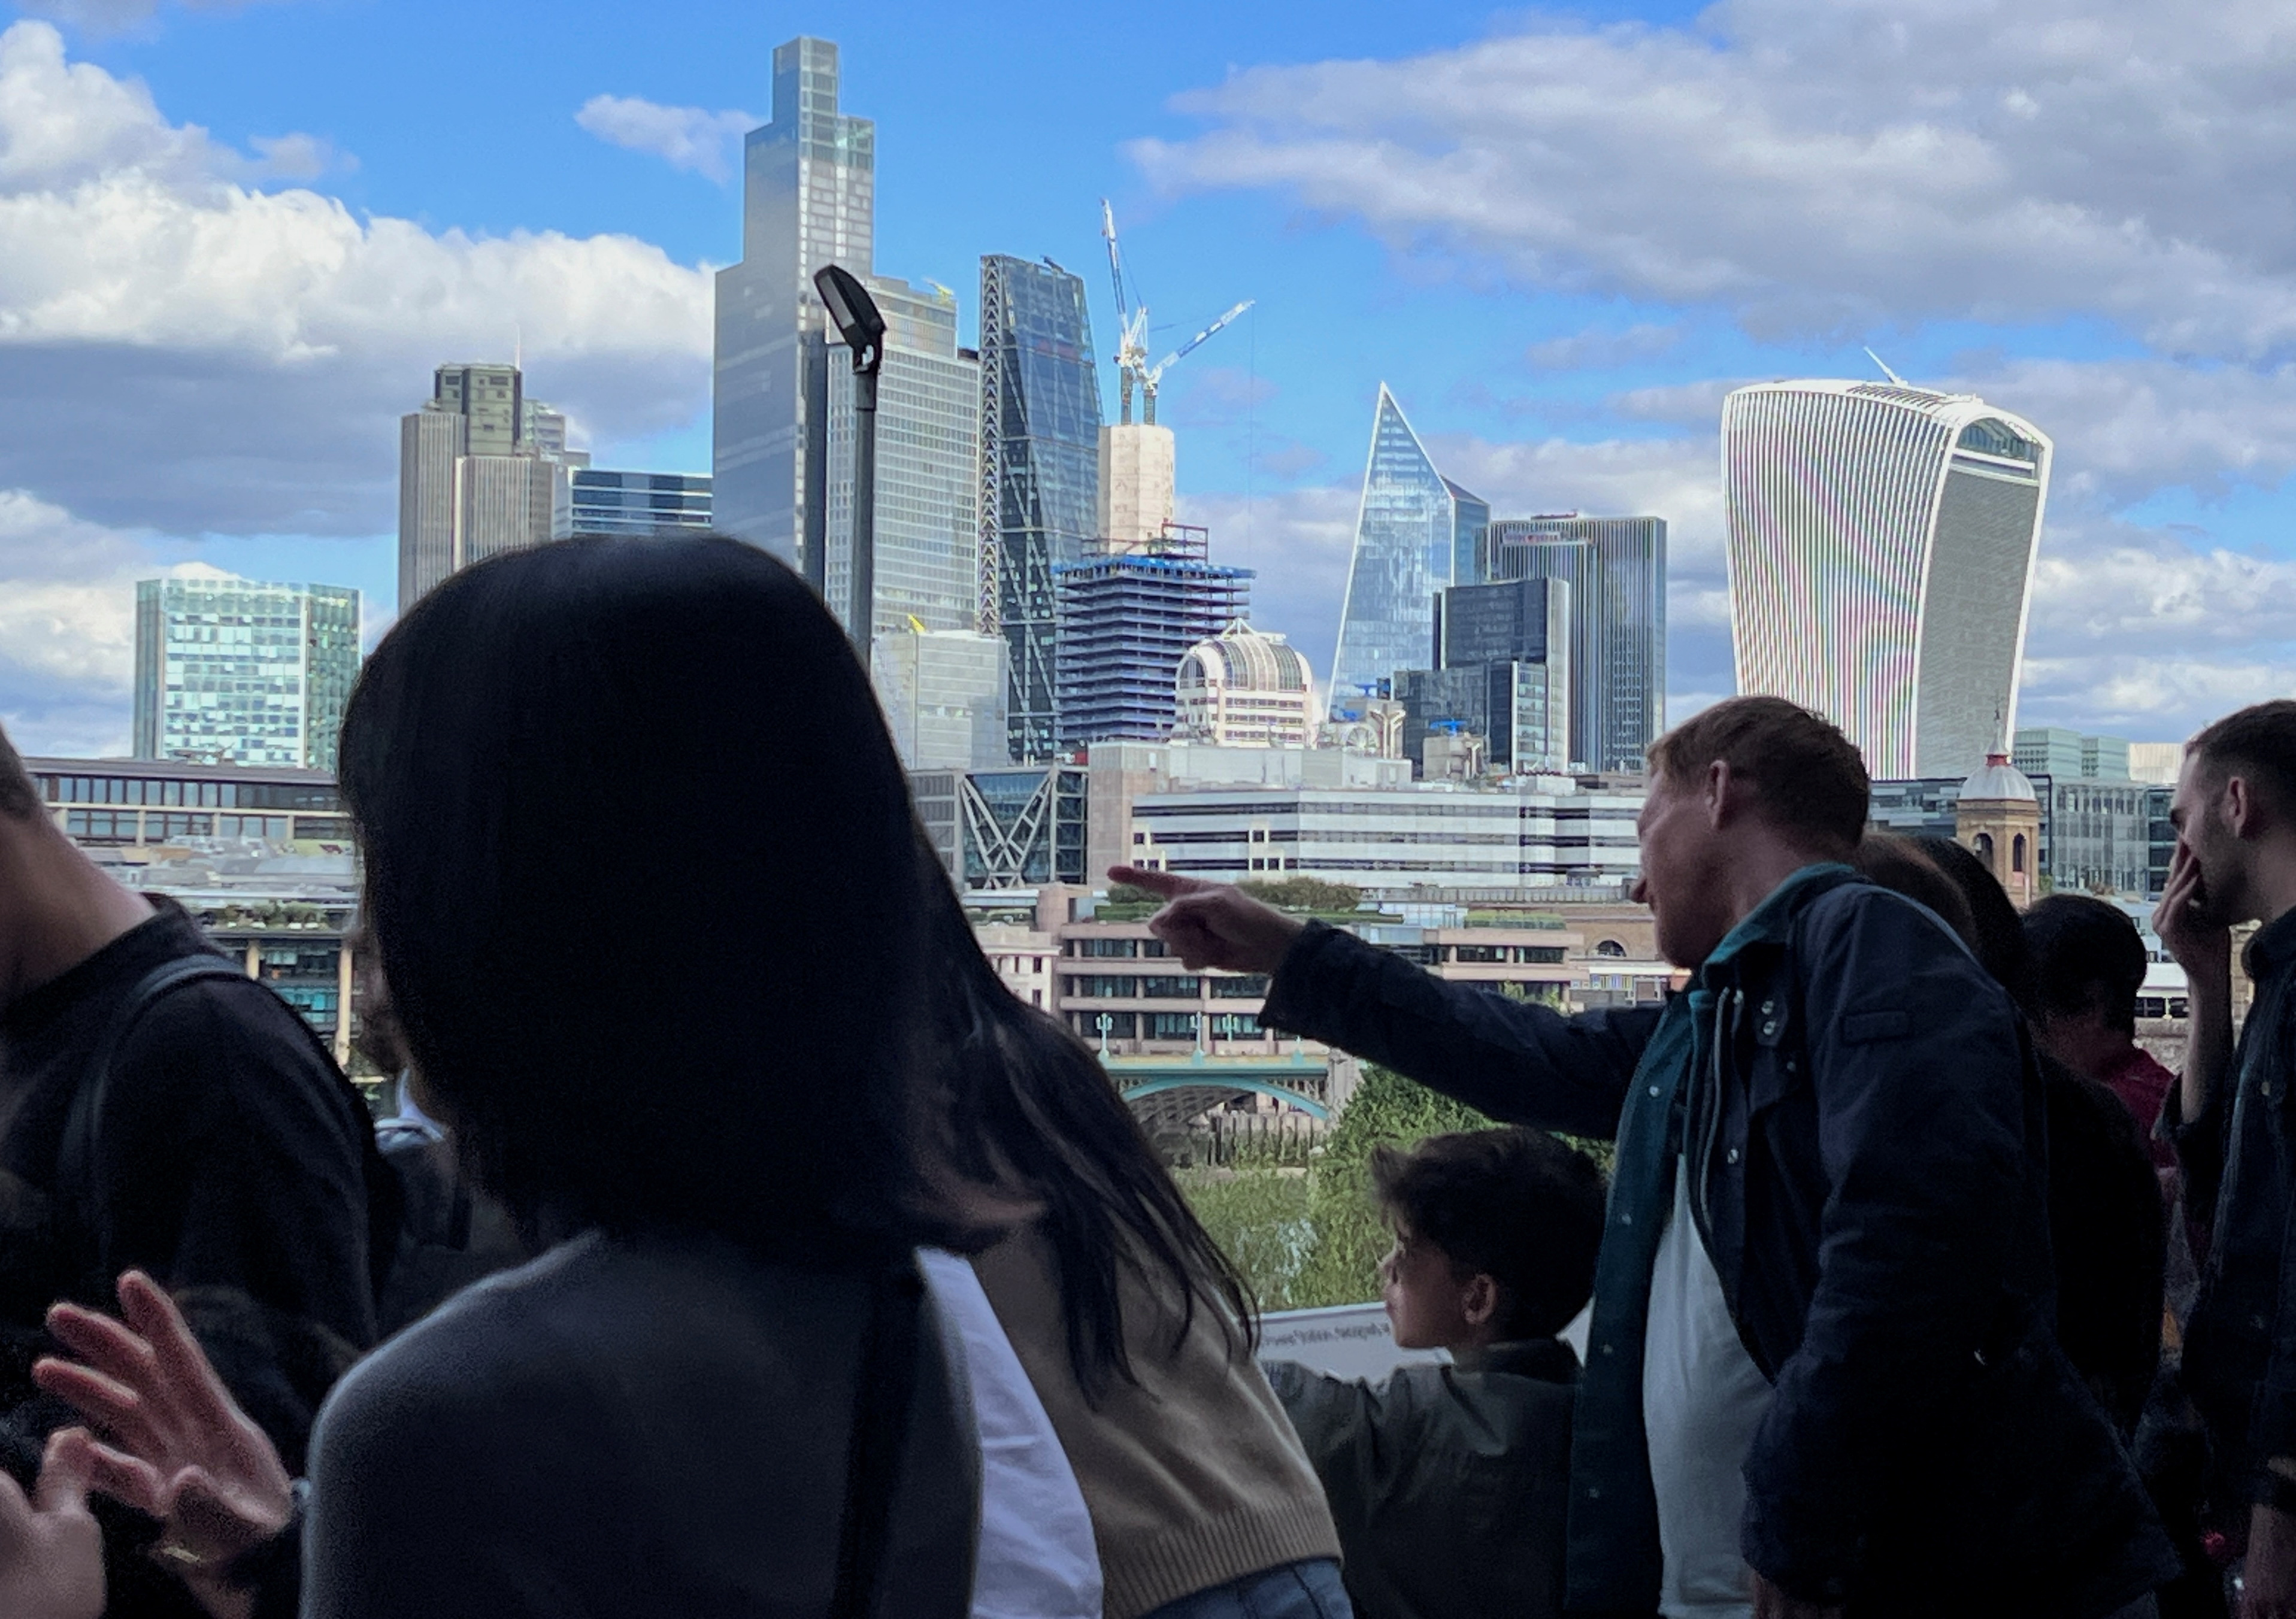 People look at a a view of the City of London skyline in